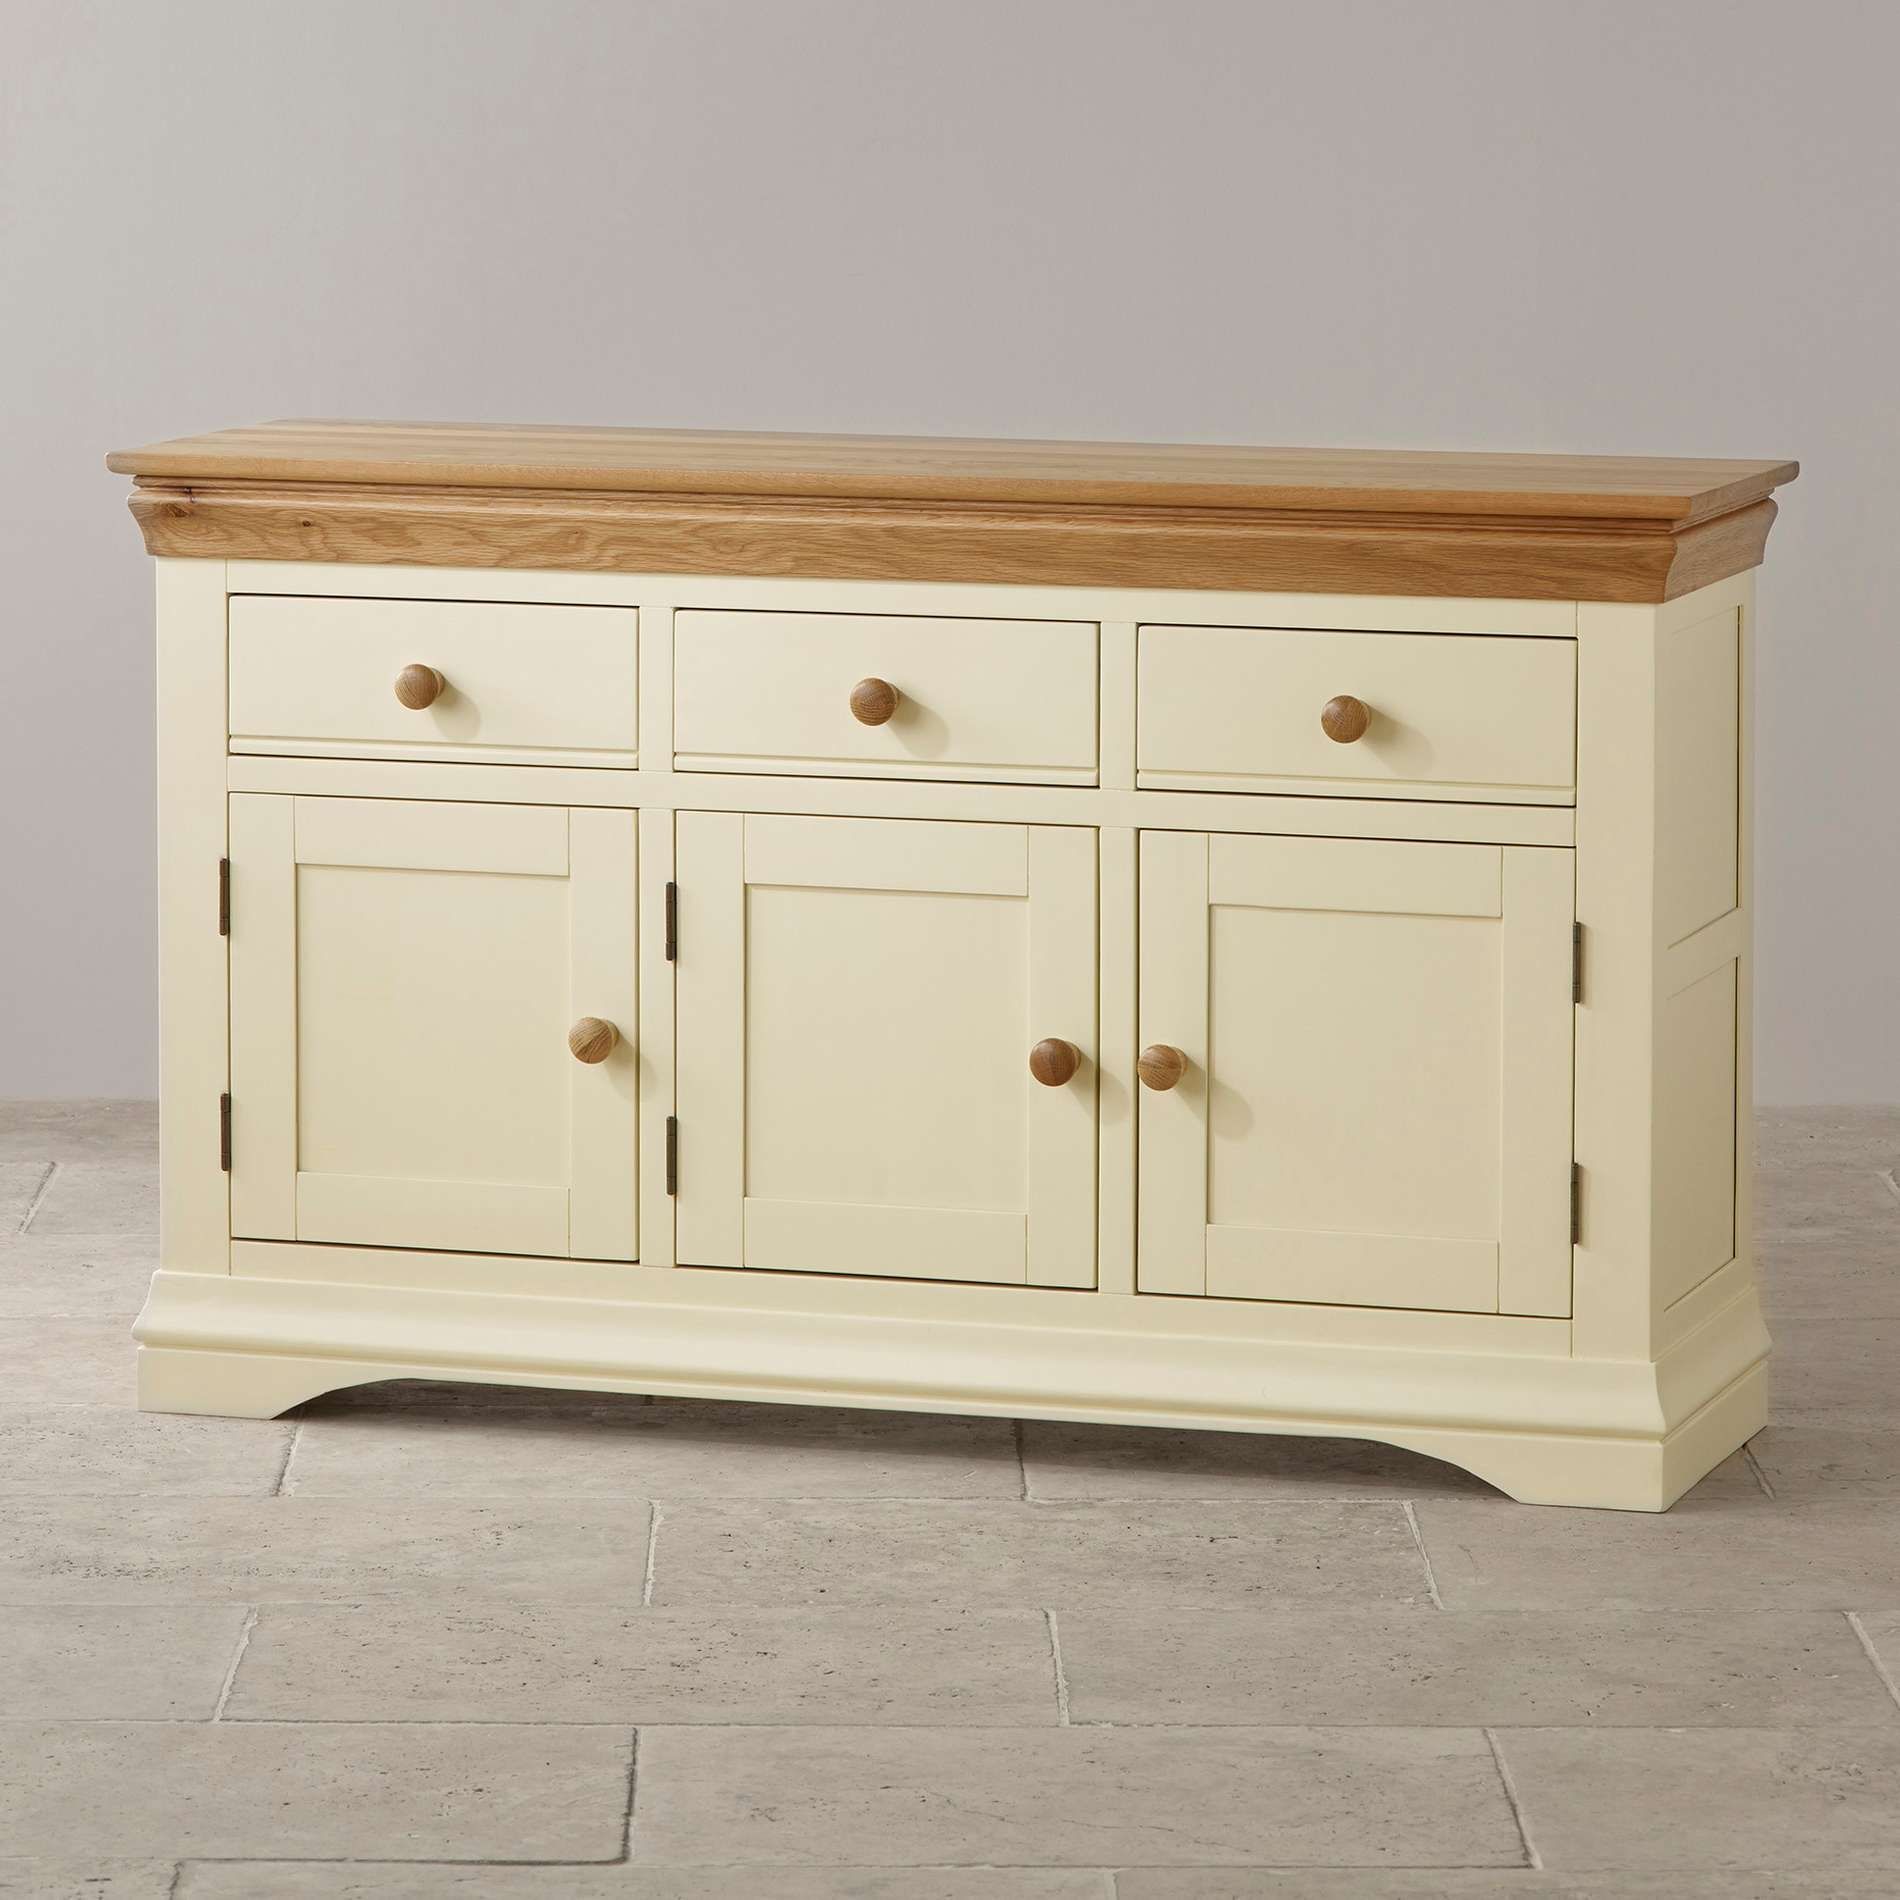 Country Cottage Natural Oak Large Sideboard – Cream Painted For Cream And Oak Sideboards (View 4 of 20)